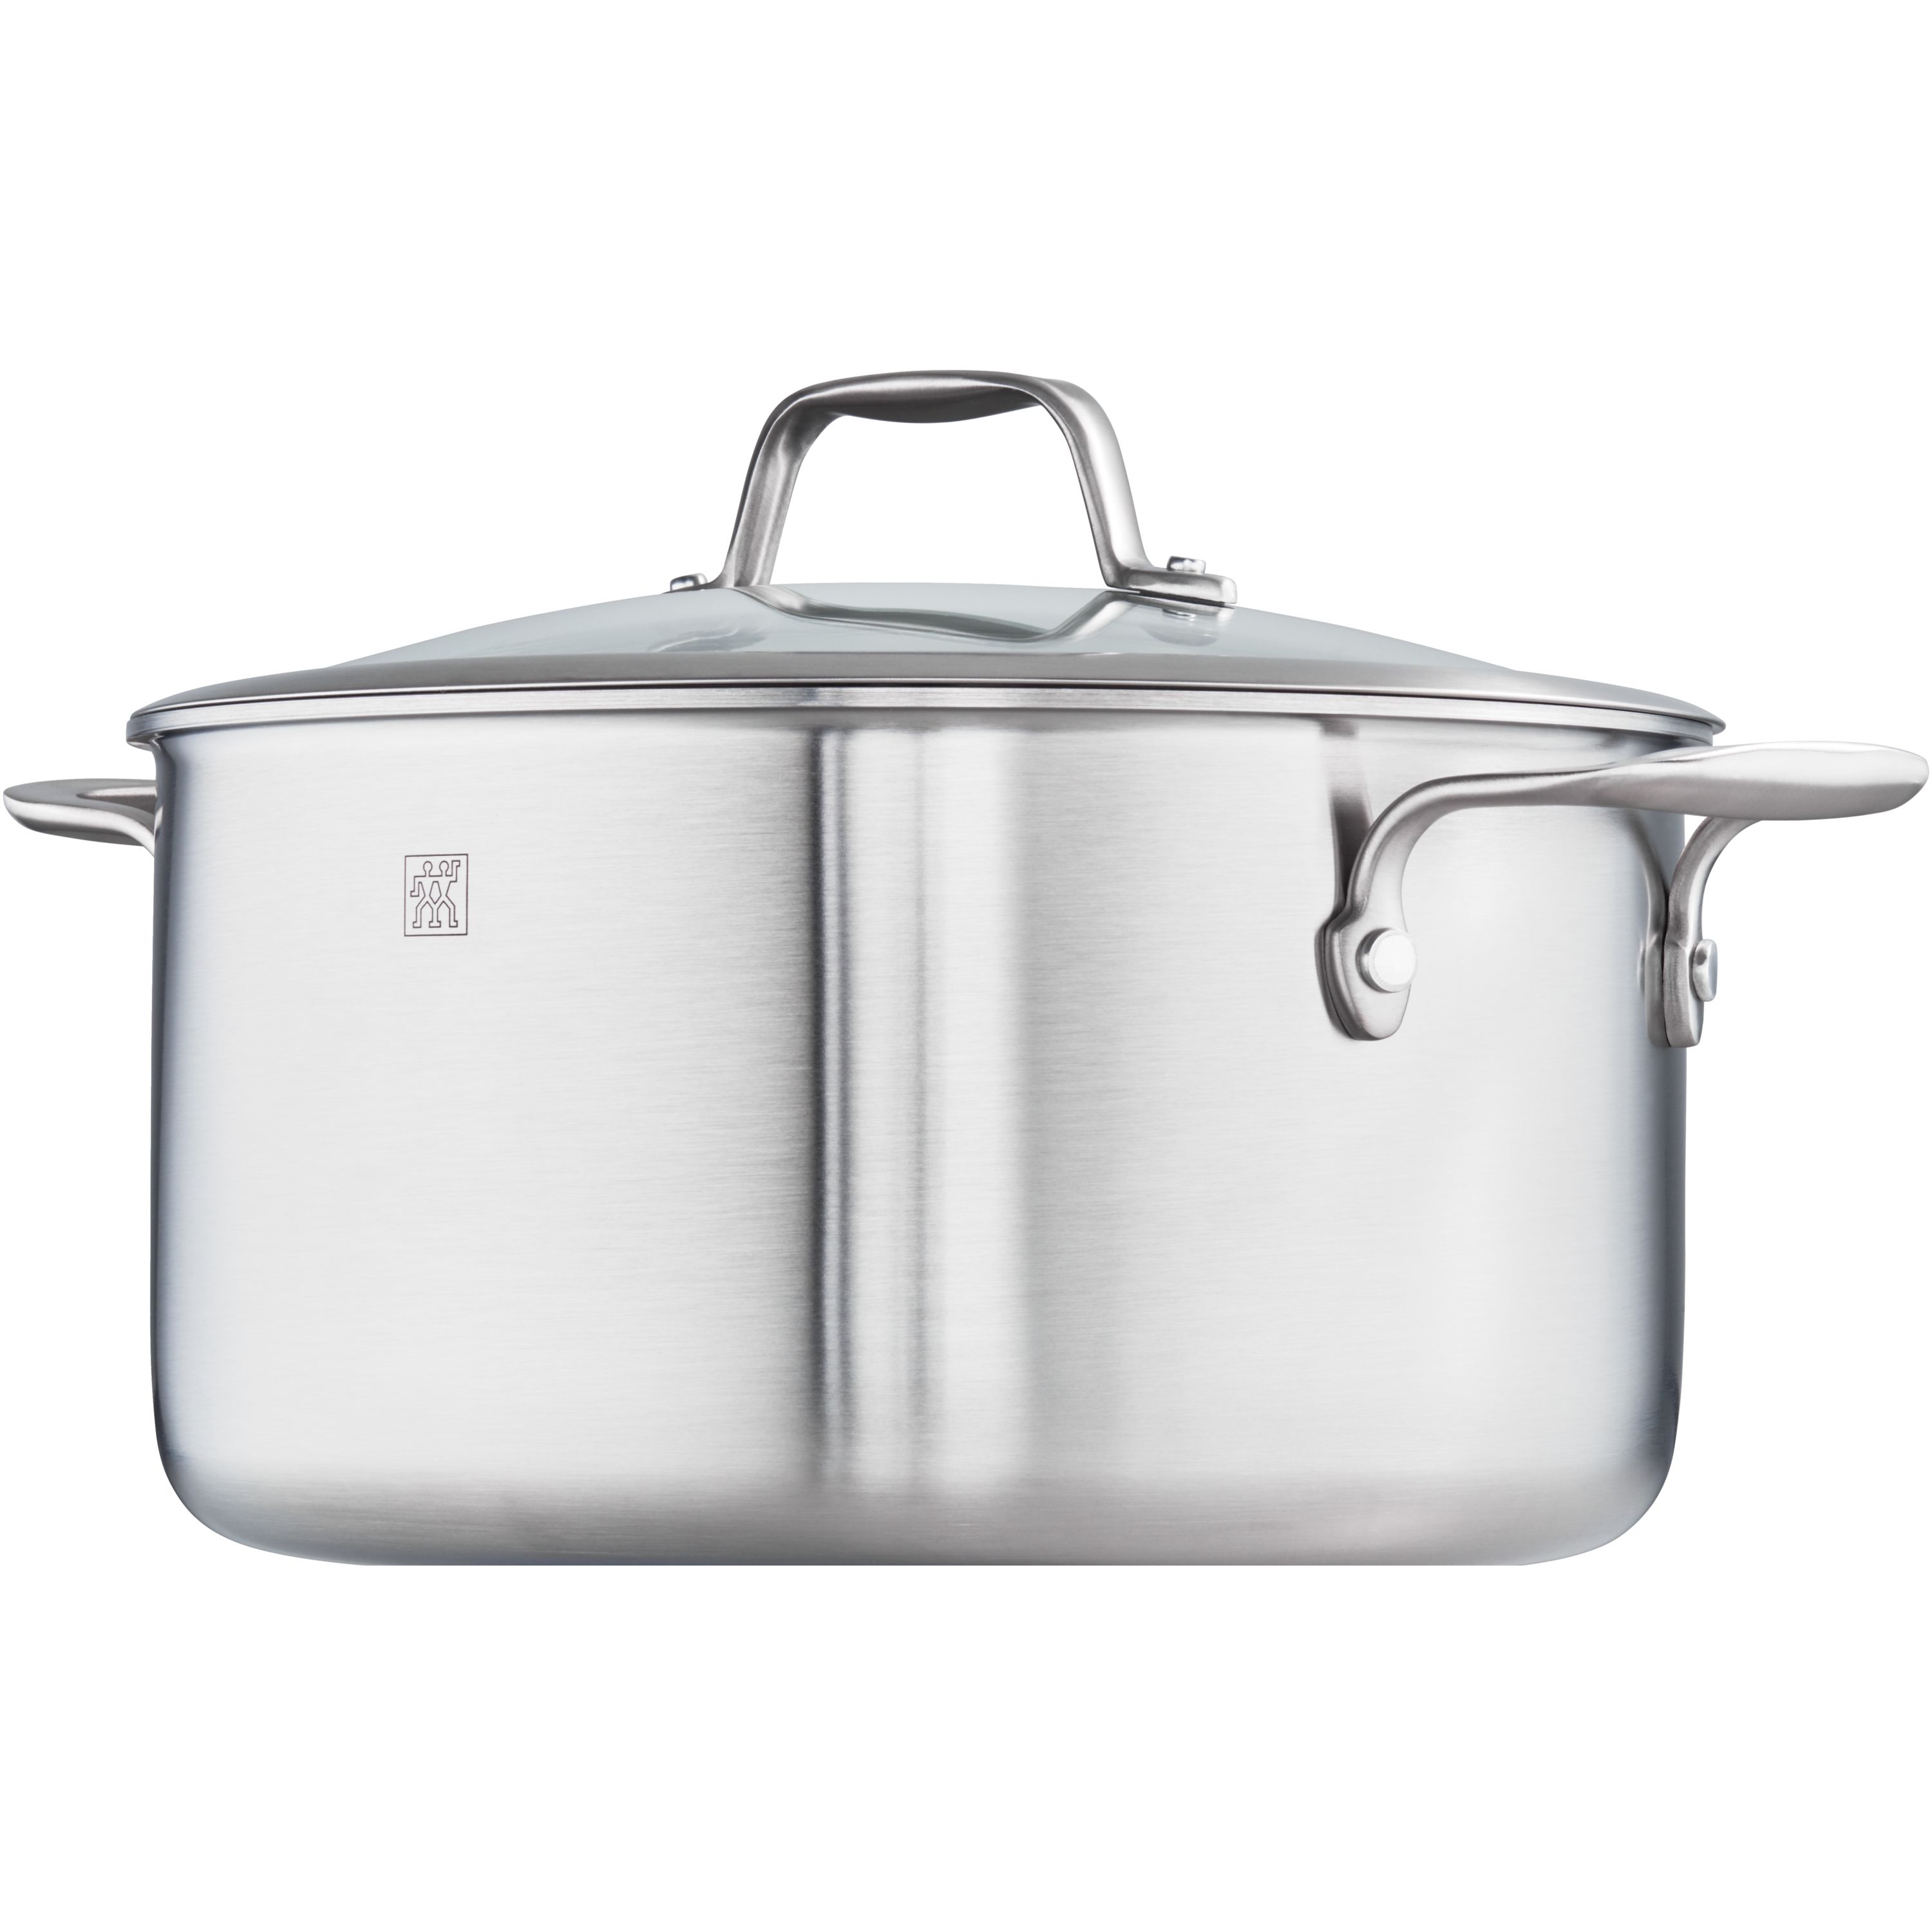 LOLYKITCH Whole Body Tri-Ply Stainless Steel 2 Quart Saucepan with Gla –  JandWShippingGroup